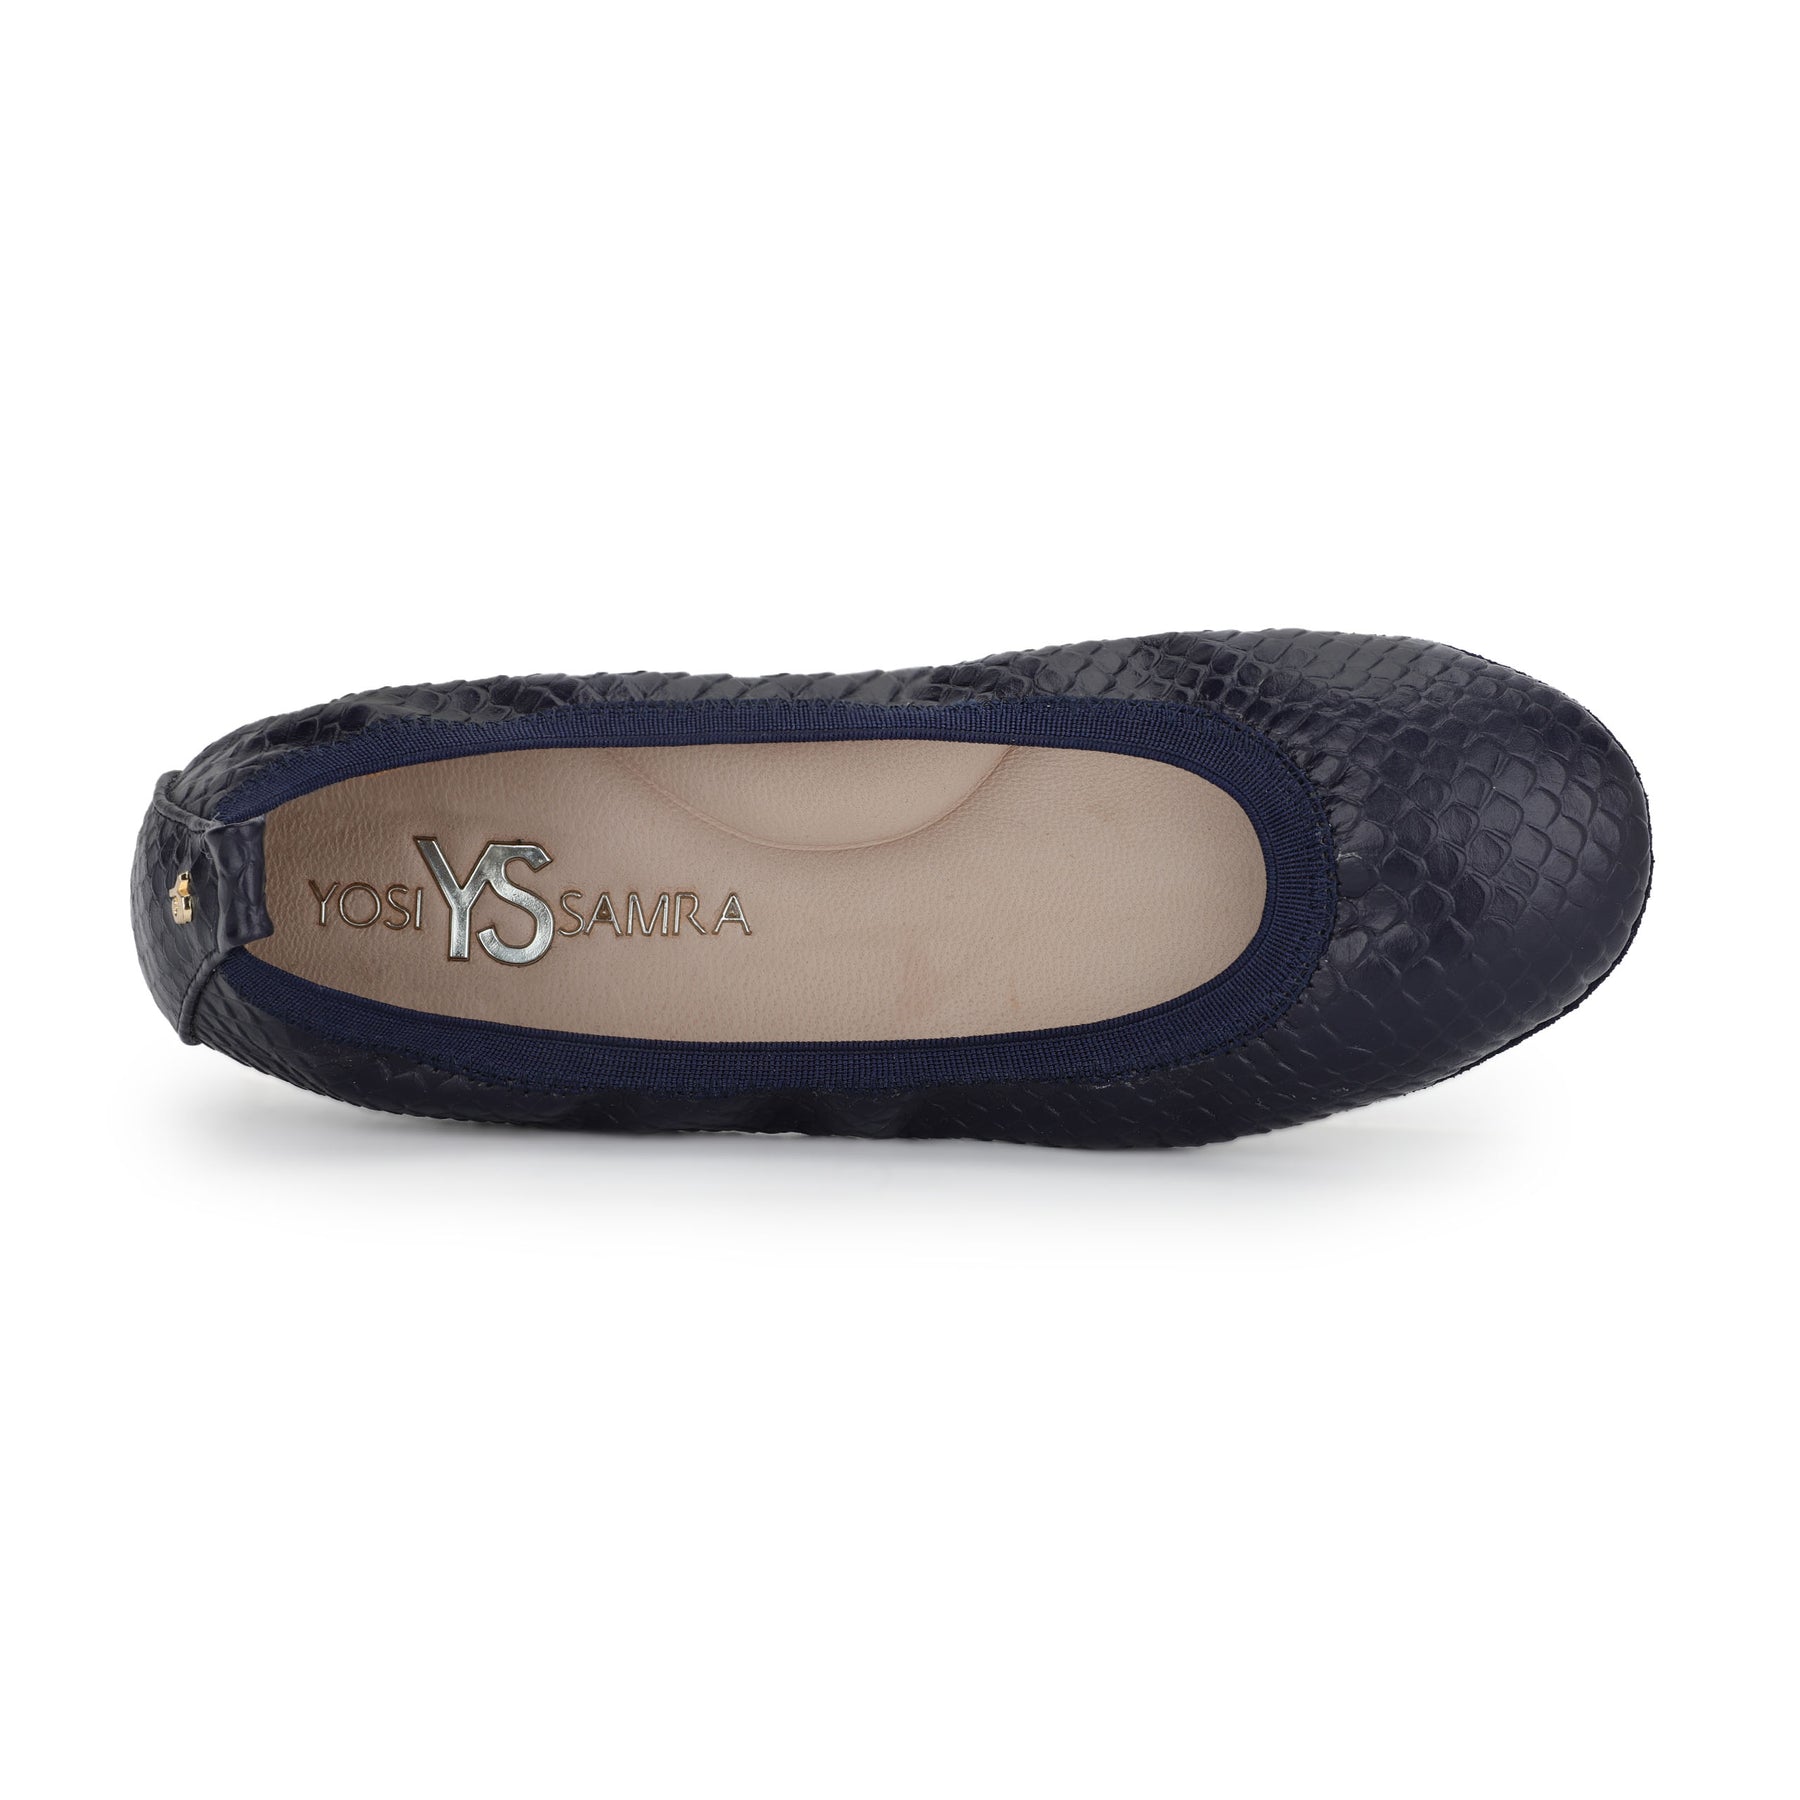 Samara Foldable Ballet Flat in Midnight Blue Scale Leather